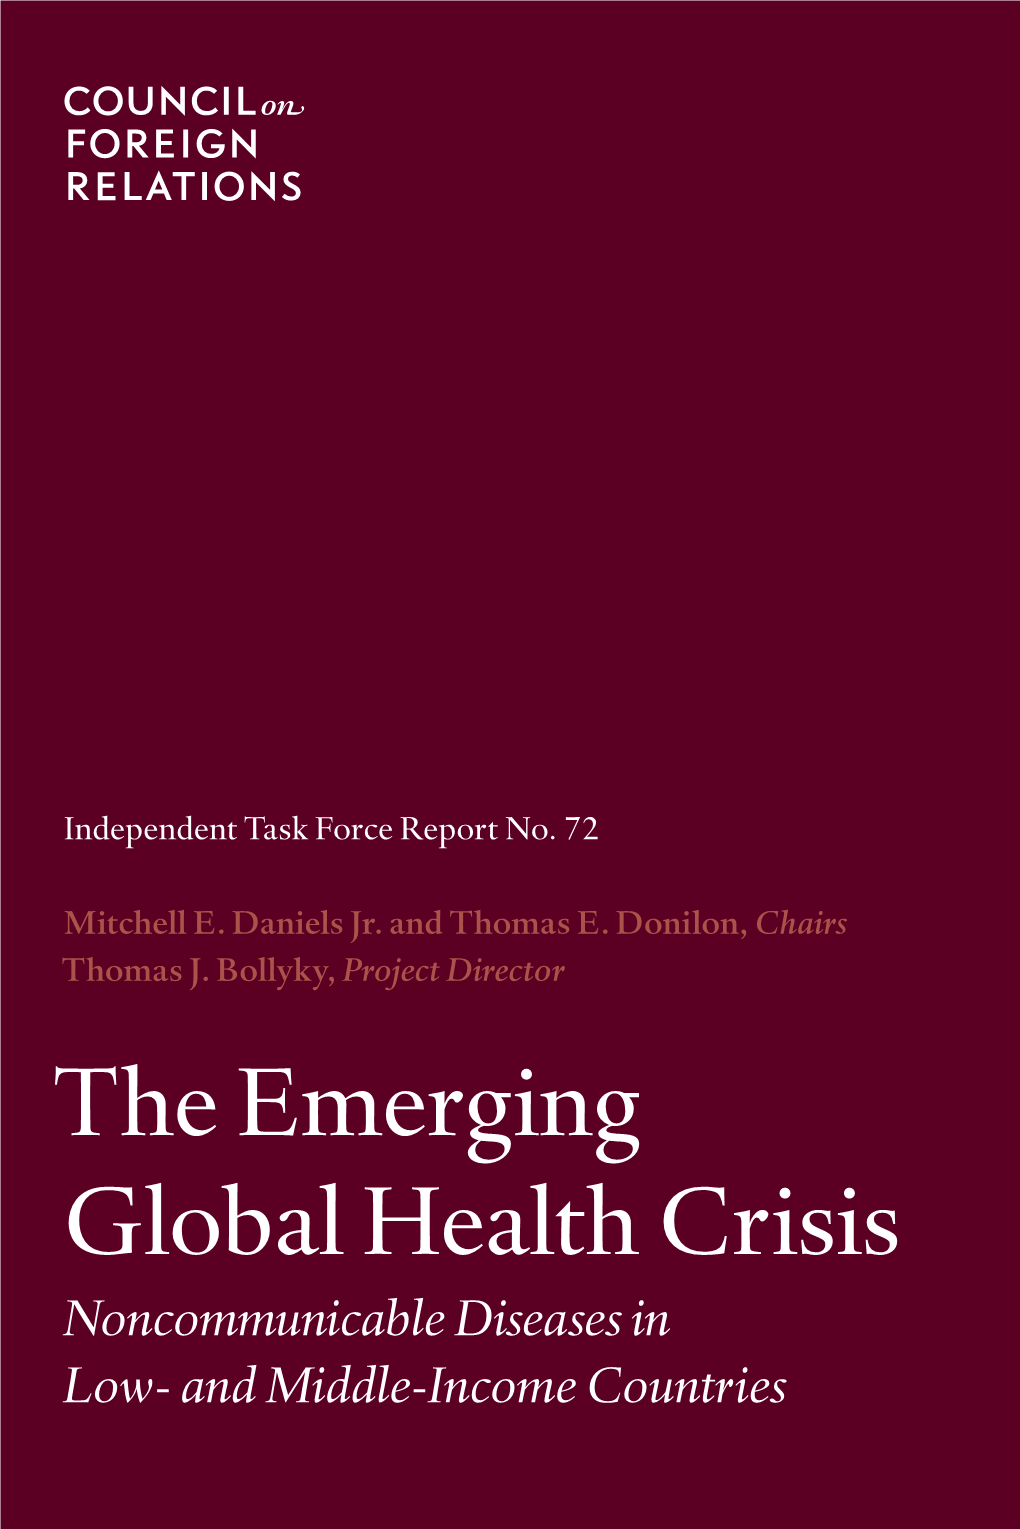 The Emerging Global Health Crisis: Noncommunicable Diseases in Low- and Middle-Income Countries Independent Task Force Report No